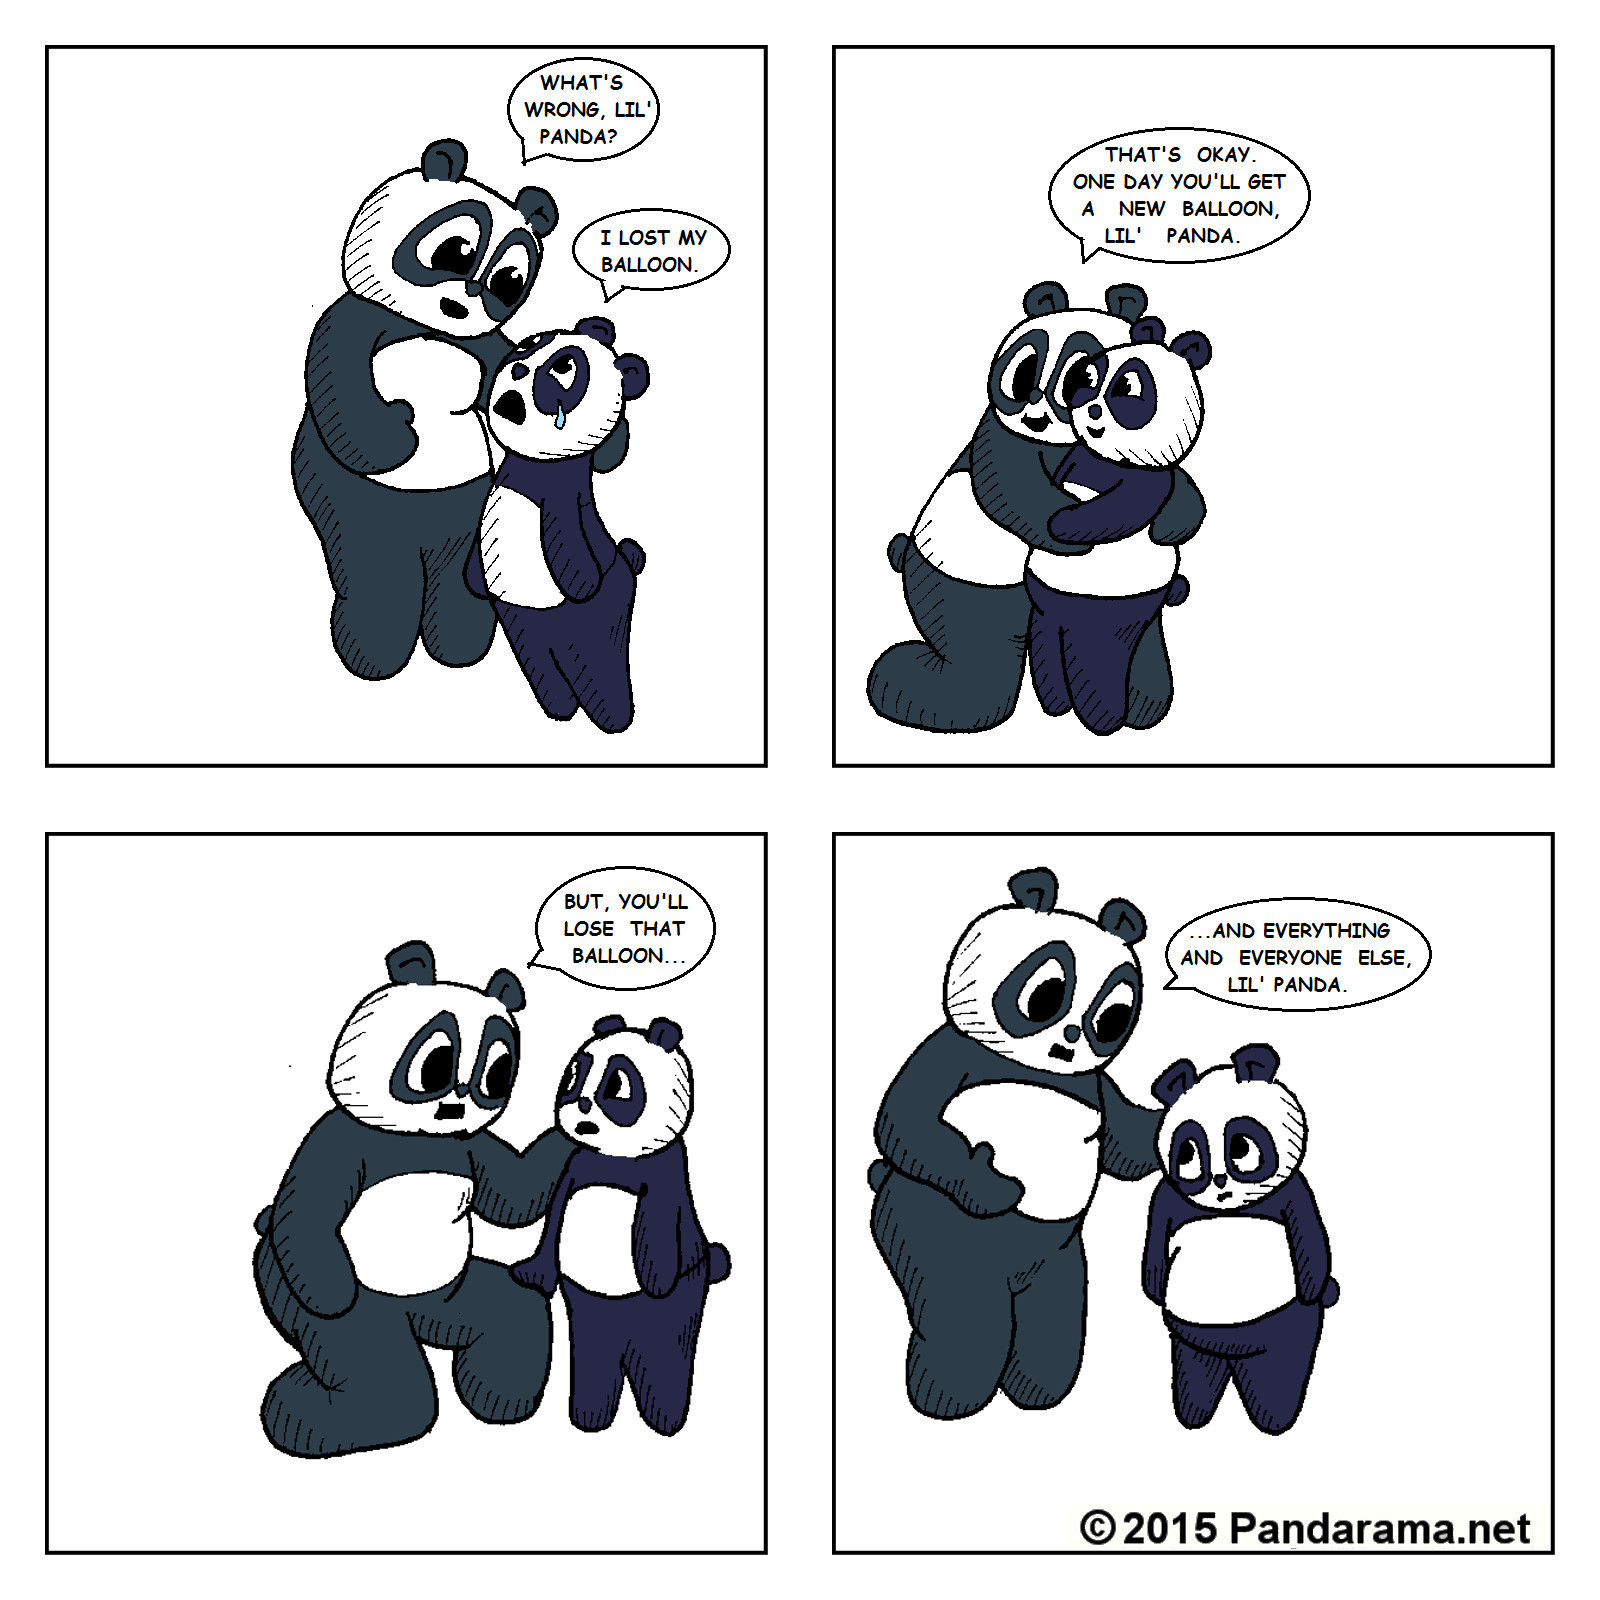 A little panda tells the big panda that he is sad because he lost his balloon. The big panda explians that he will get a new balloon, then lose it and everything and everyone else.